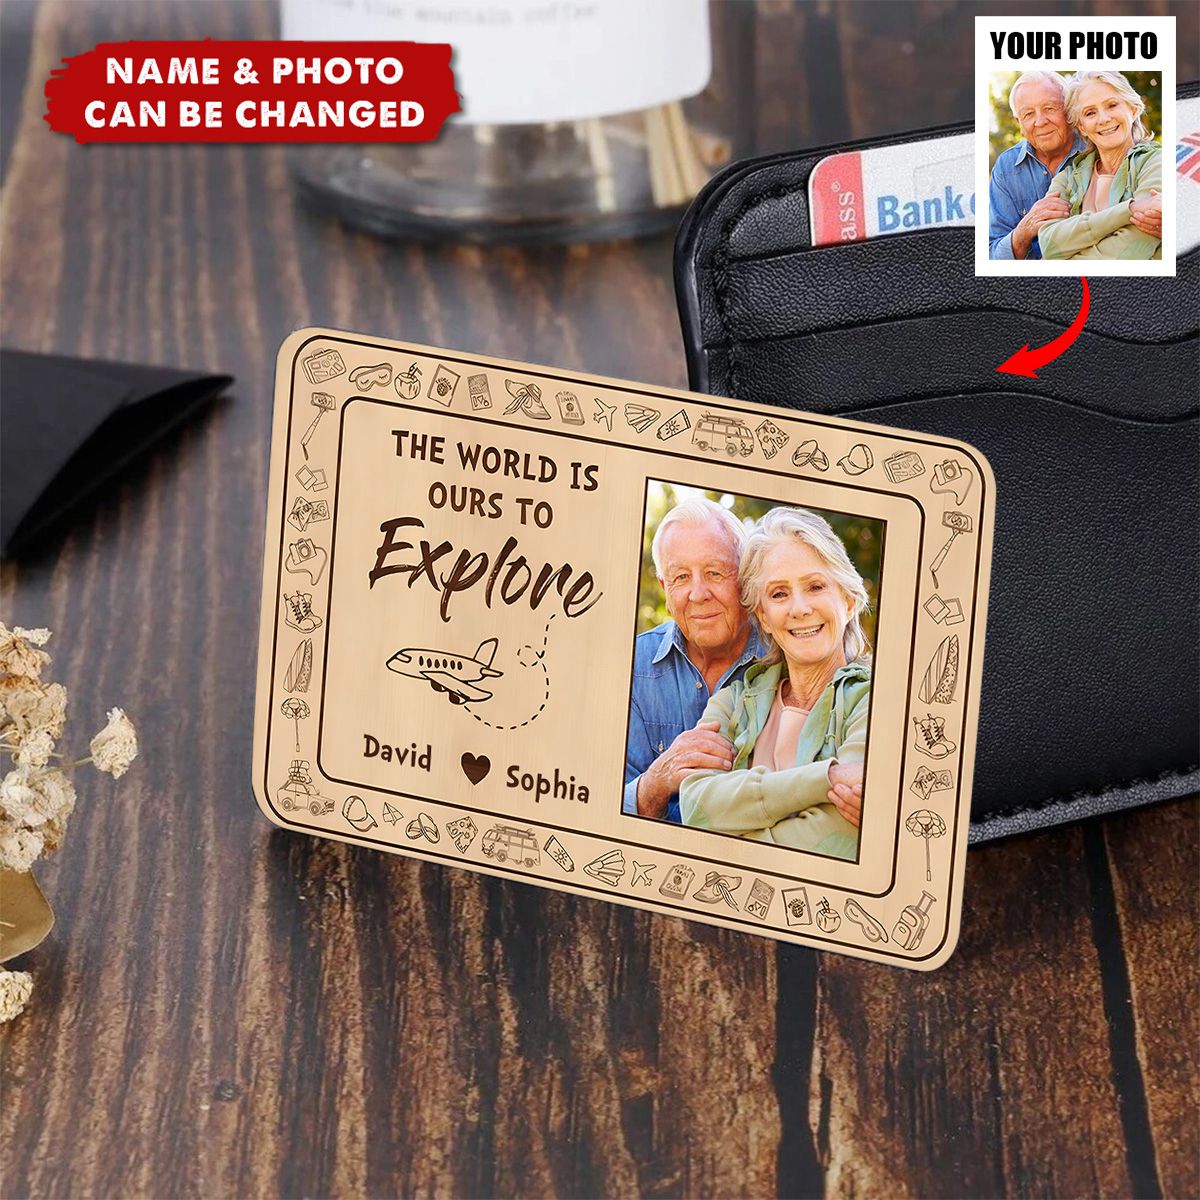 The World Is Ours To Explore - Personalized Photo Wallet Card